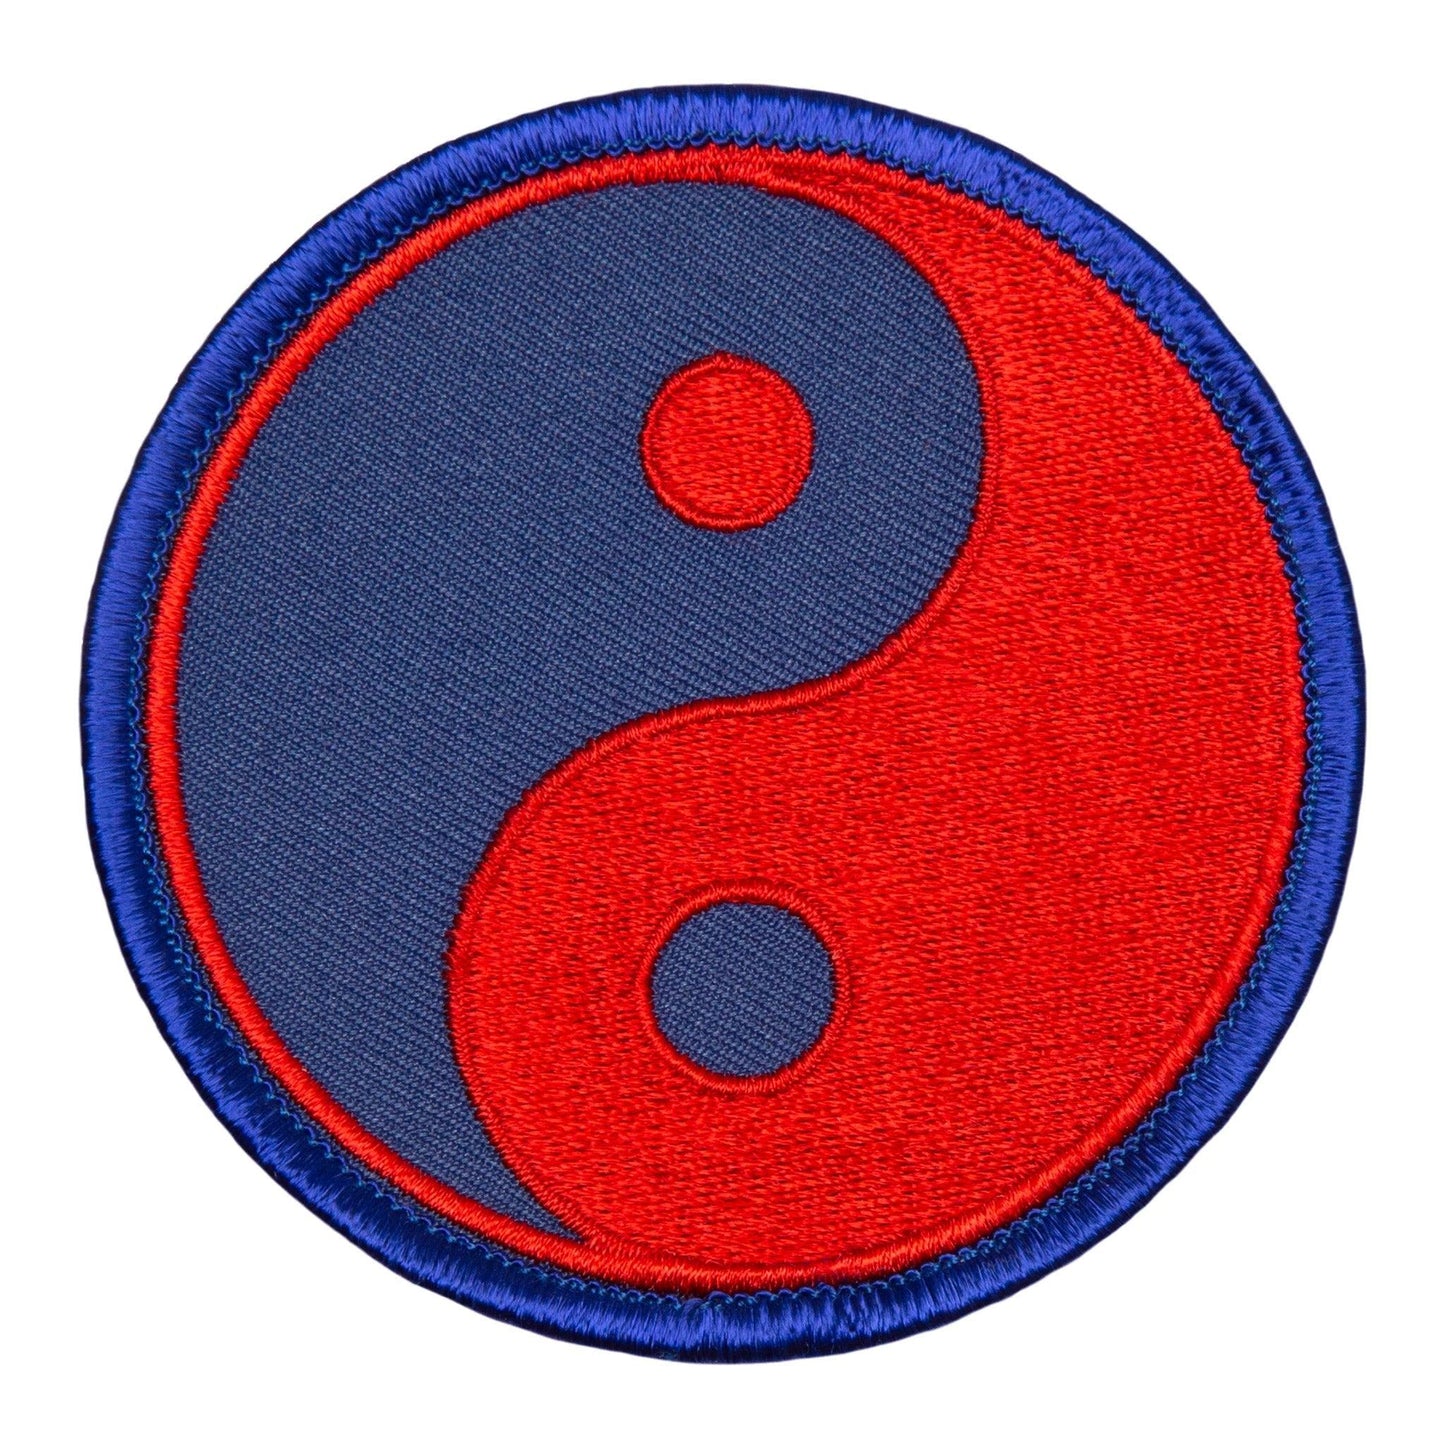 Yin & Yang-Red and Blue Patch - Violent Art Shop